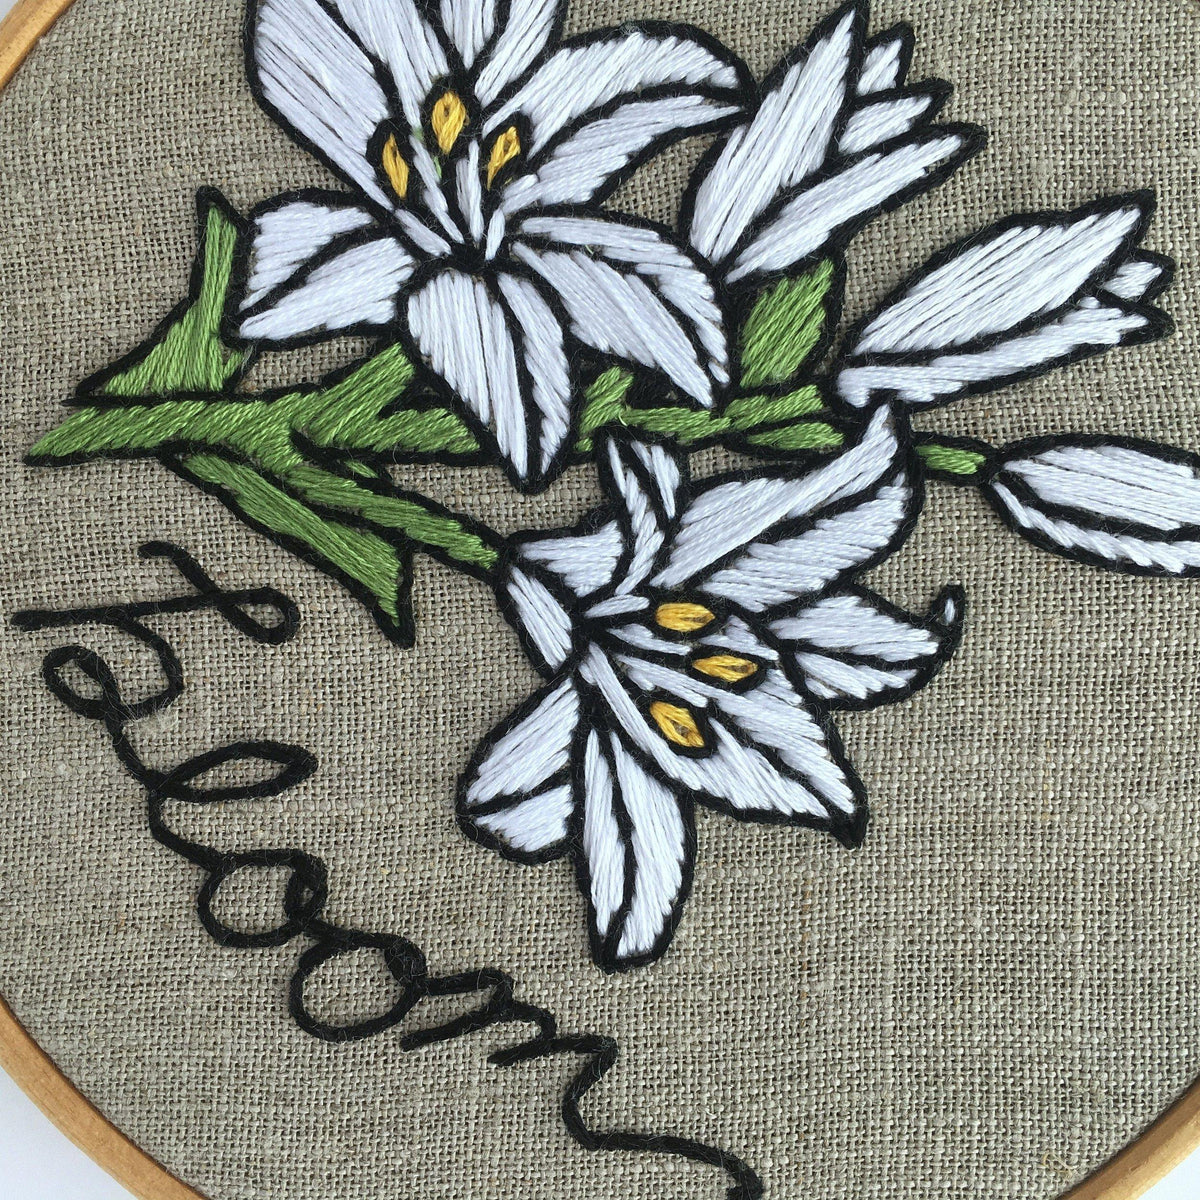 Bloom Embroidery Kit